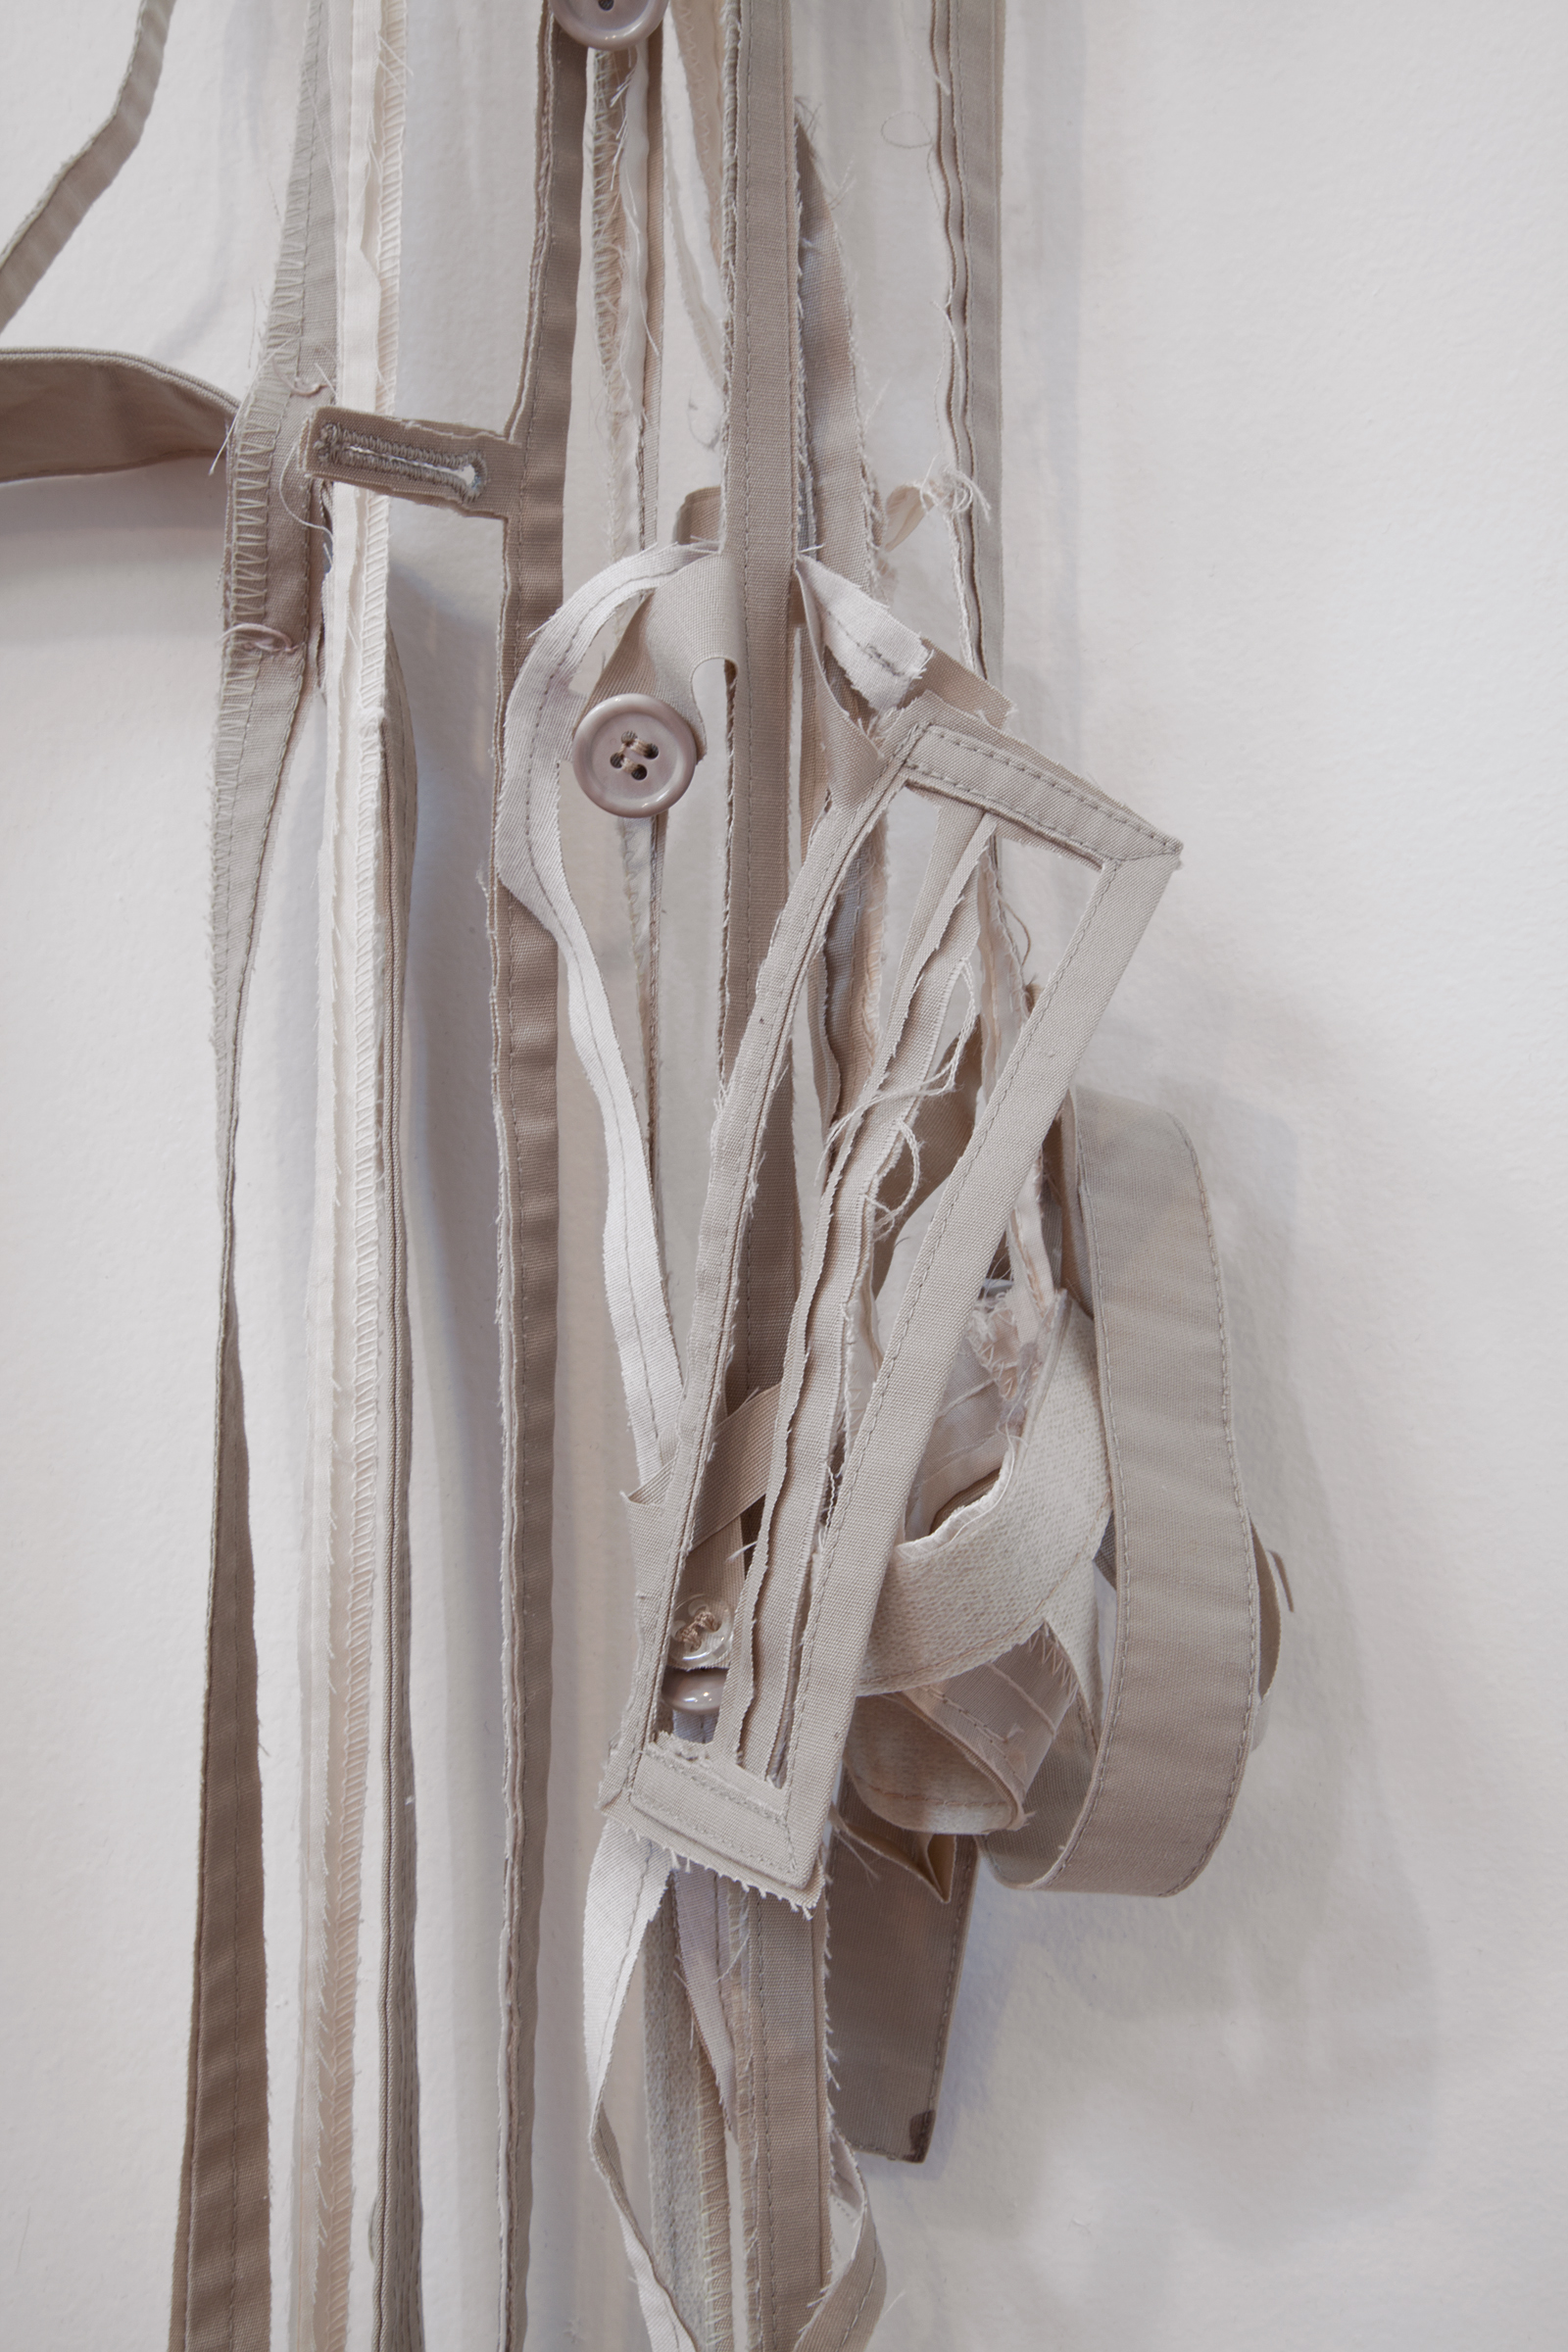   ANNA SEW HOY  (detail)&nbsp; beige/cream , fired stoneware, trench coat and resin finger hook, 55" x 17" x 3.5", 2012 